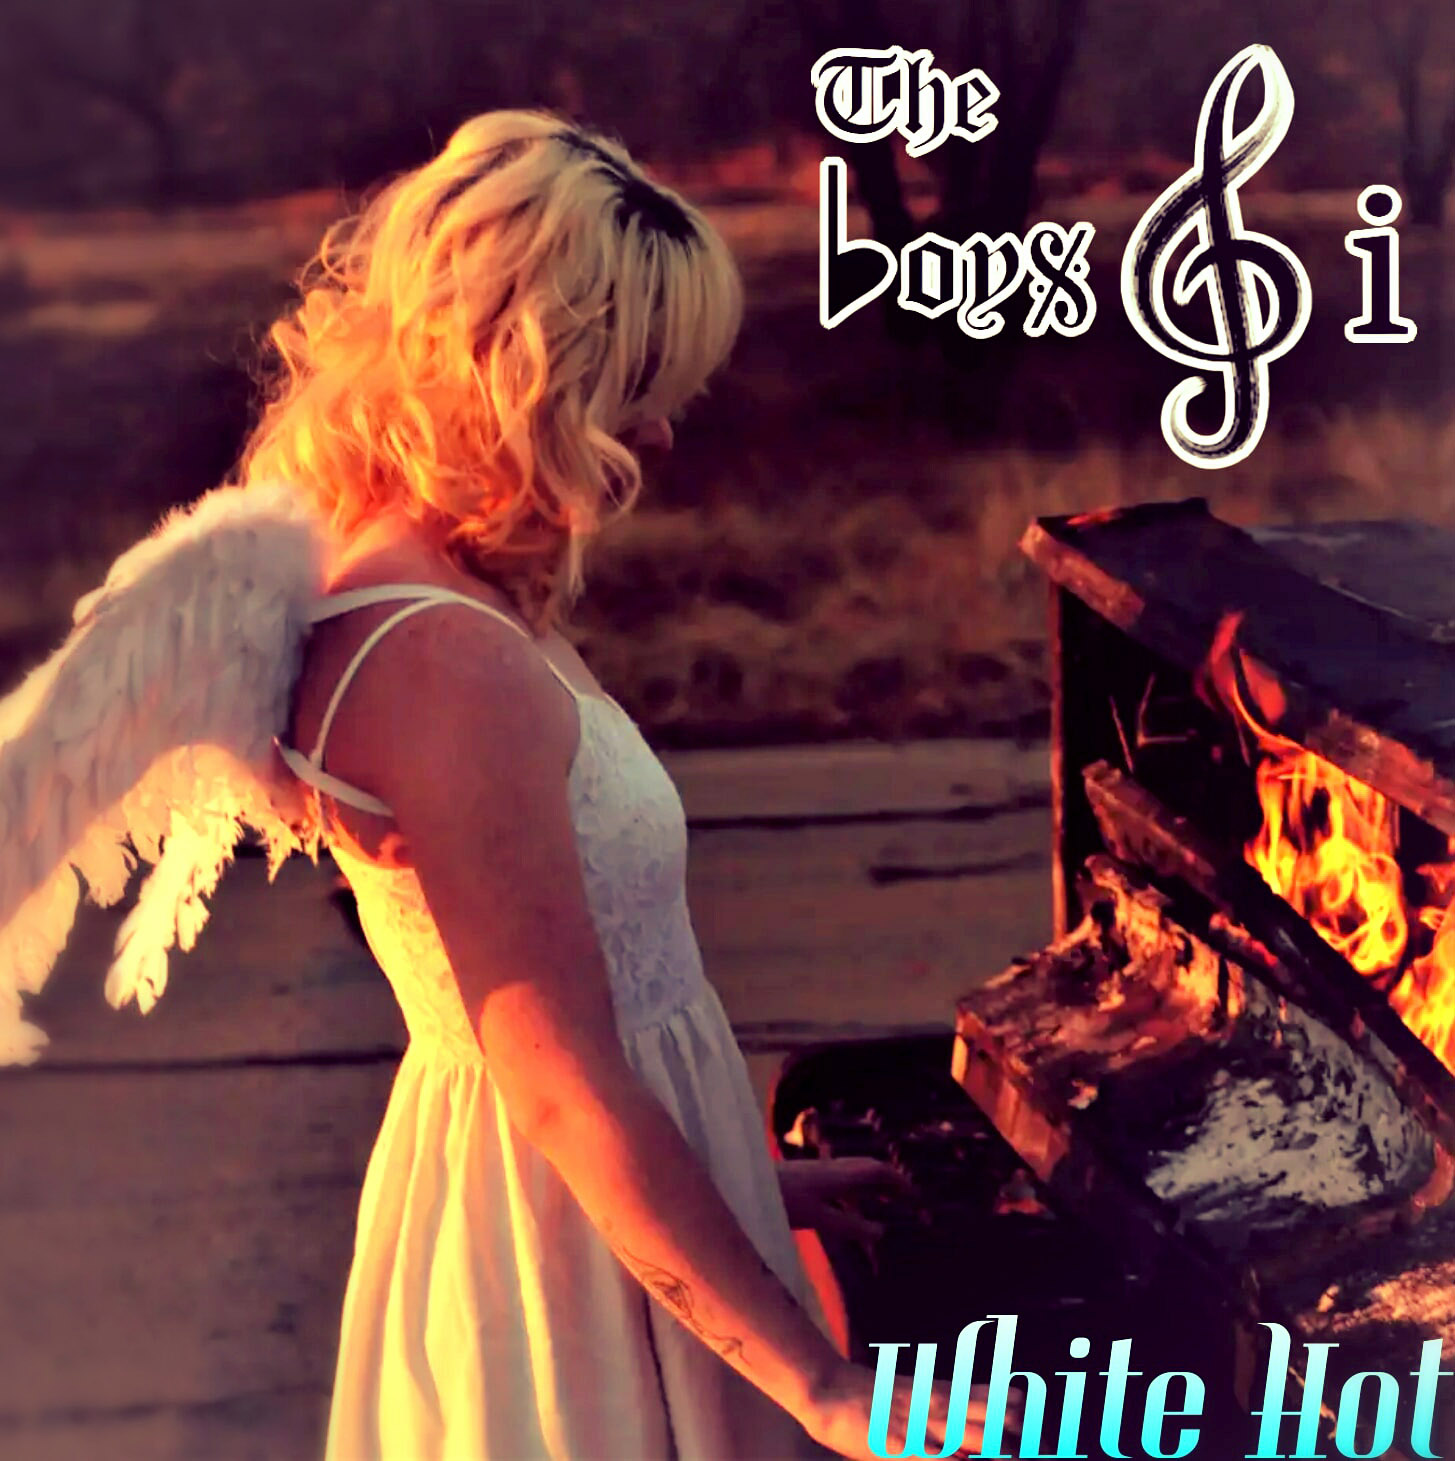 Kitchener, ON Alt-Rockers The Boys & I Light Up a Lead-Off Single That’s “White Hot”